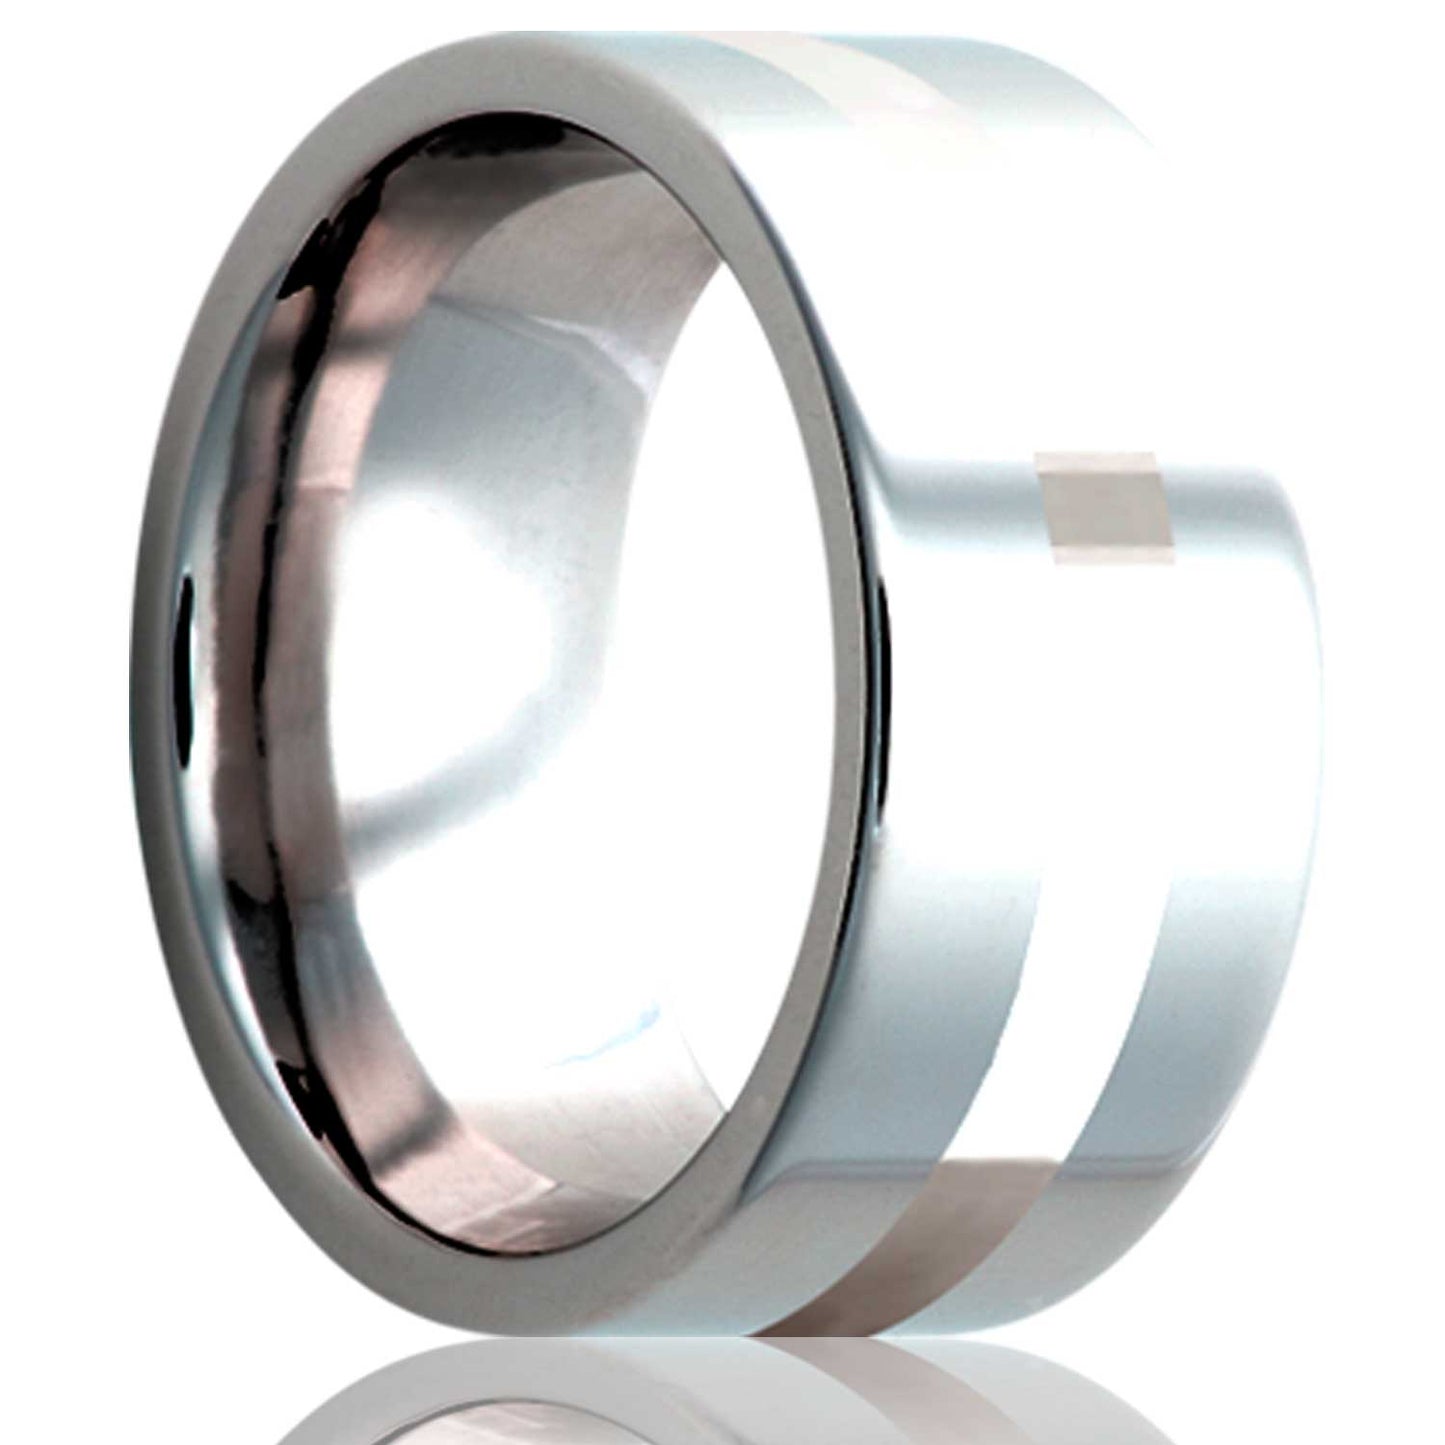 A argentium silver inlay cobalt wedding band displayed on a neutral white background.